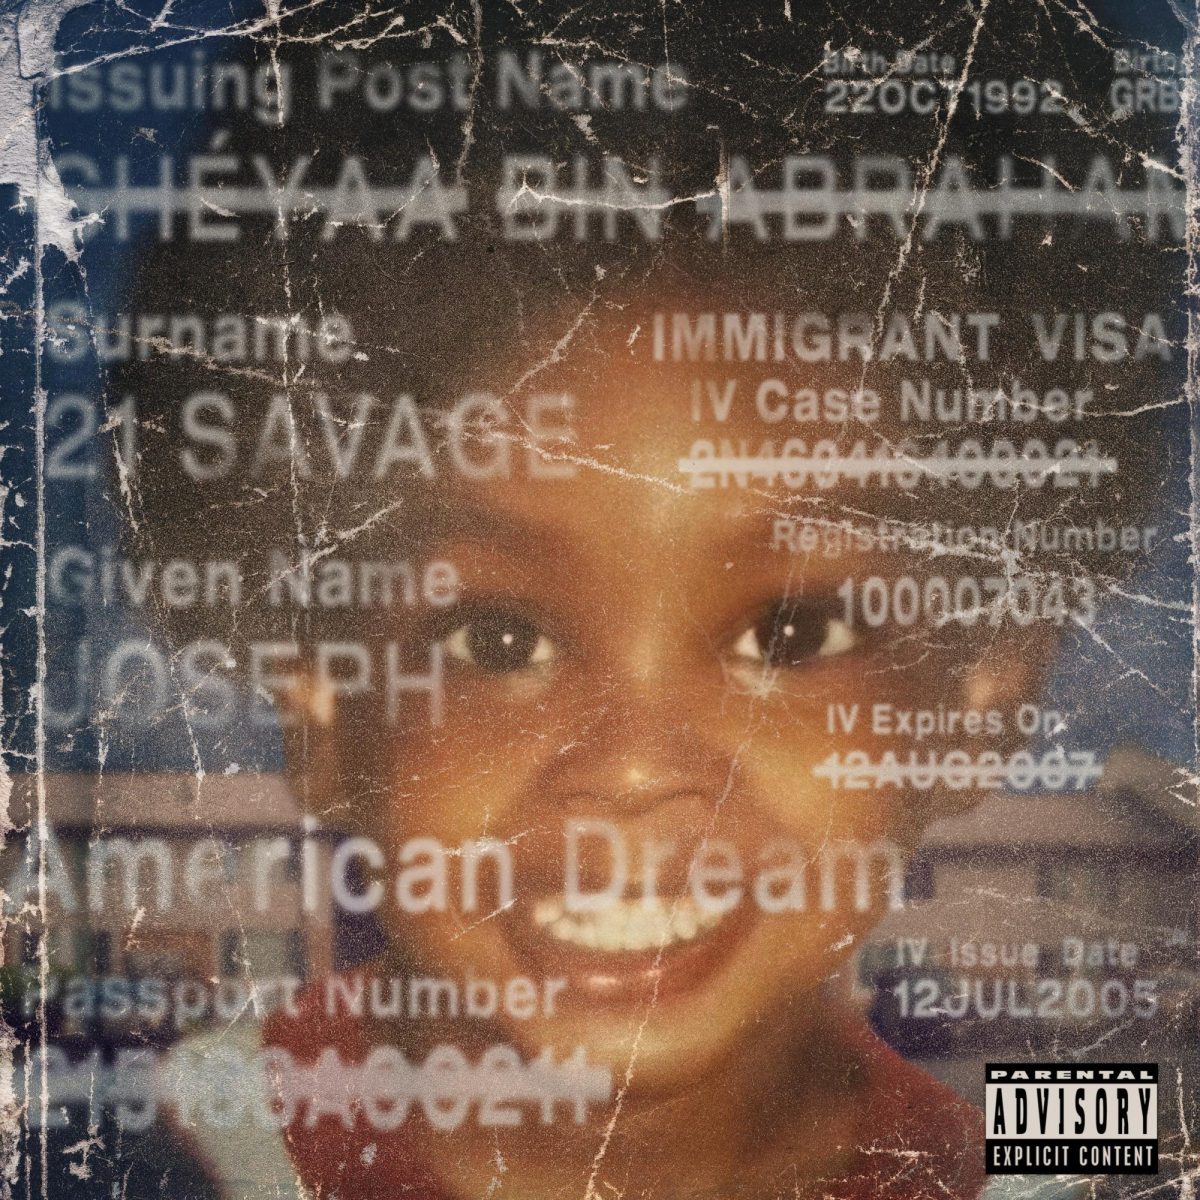 The cover art for american dream displays a baby picture of 21 Savage, with several personal details scattered throughout. The promotional images released on Instagram for this LP followed a similar format, with Savage announcing the features by posting baby pictures of the guest contributors. (Photo credit: rateyourmusic.com)